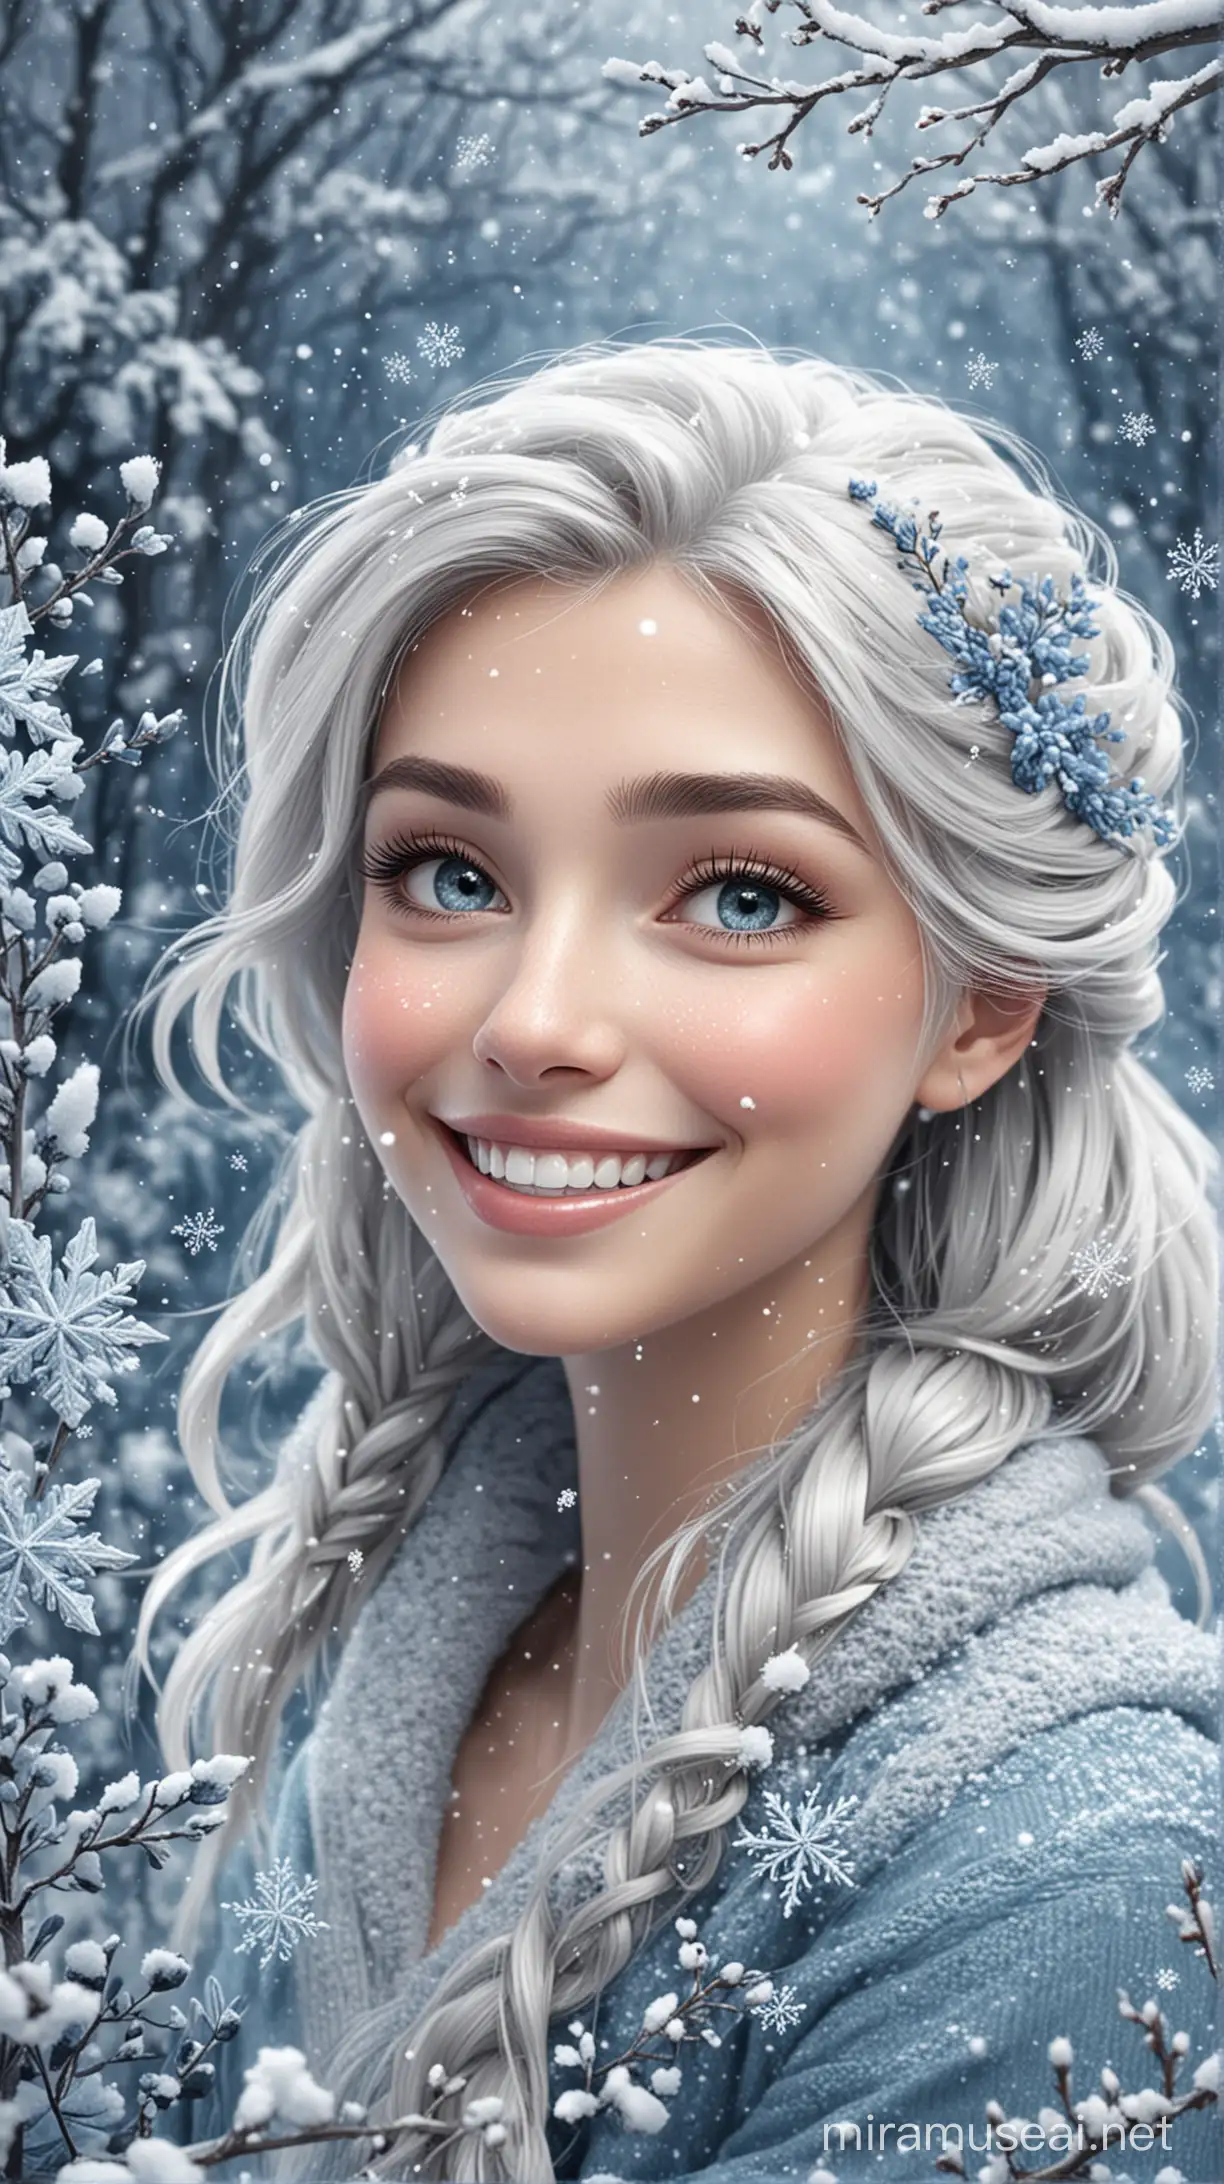 Frozen Cartoon Character Smiling Surrounded by Snow and Flowers